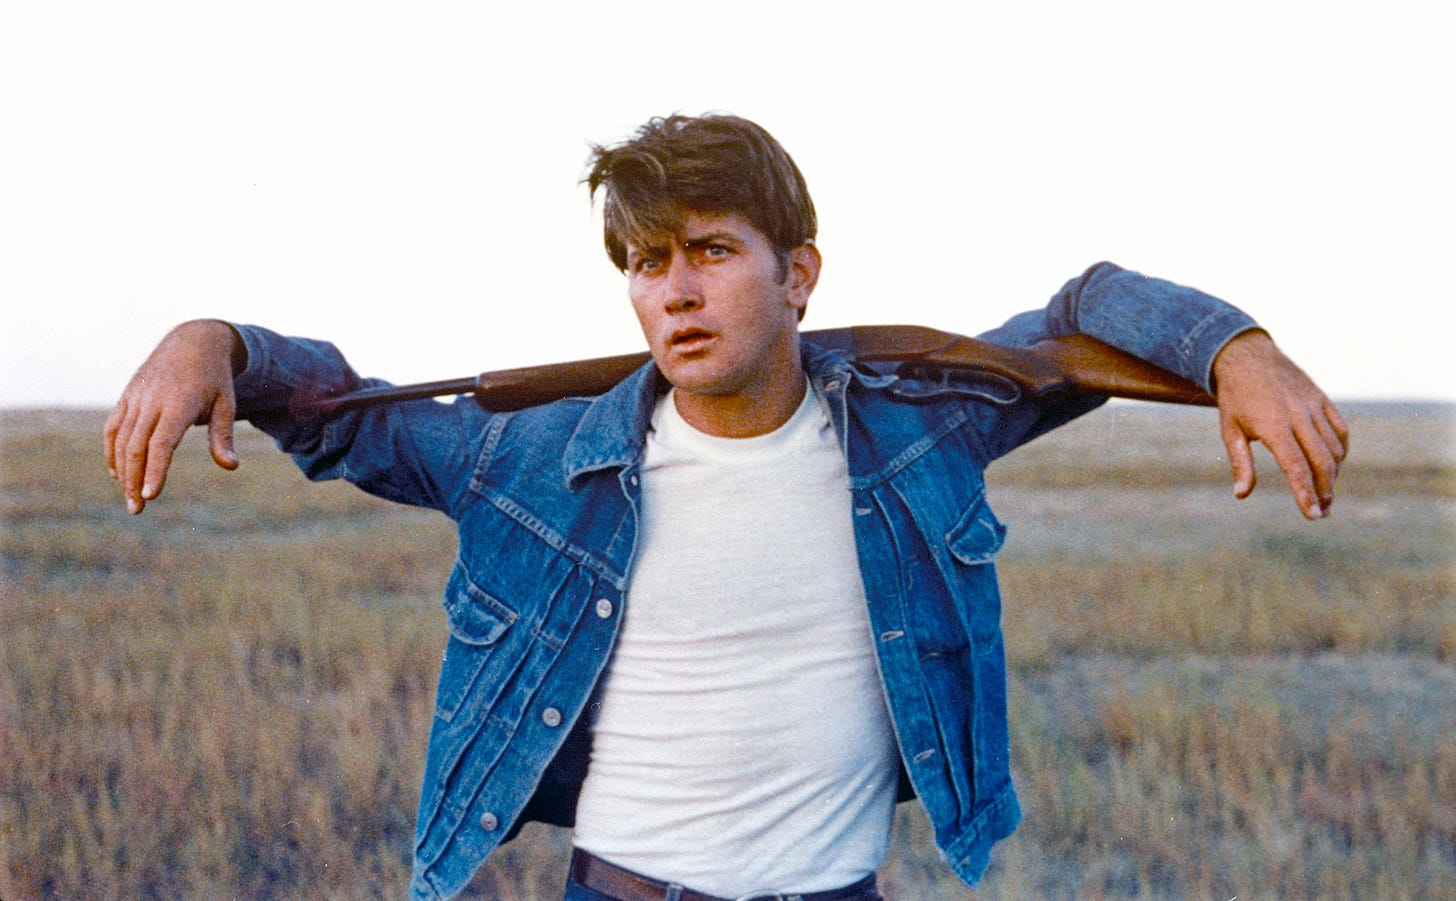 A young man in a jean jacket and white T-shirt stands in a field with a rifle across his shoulders